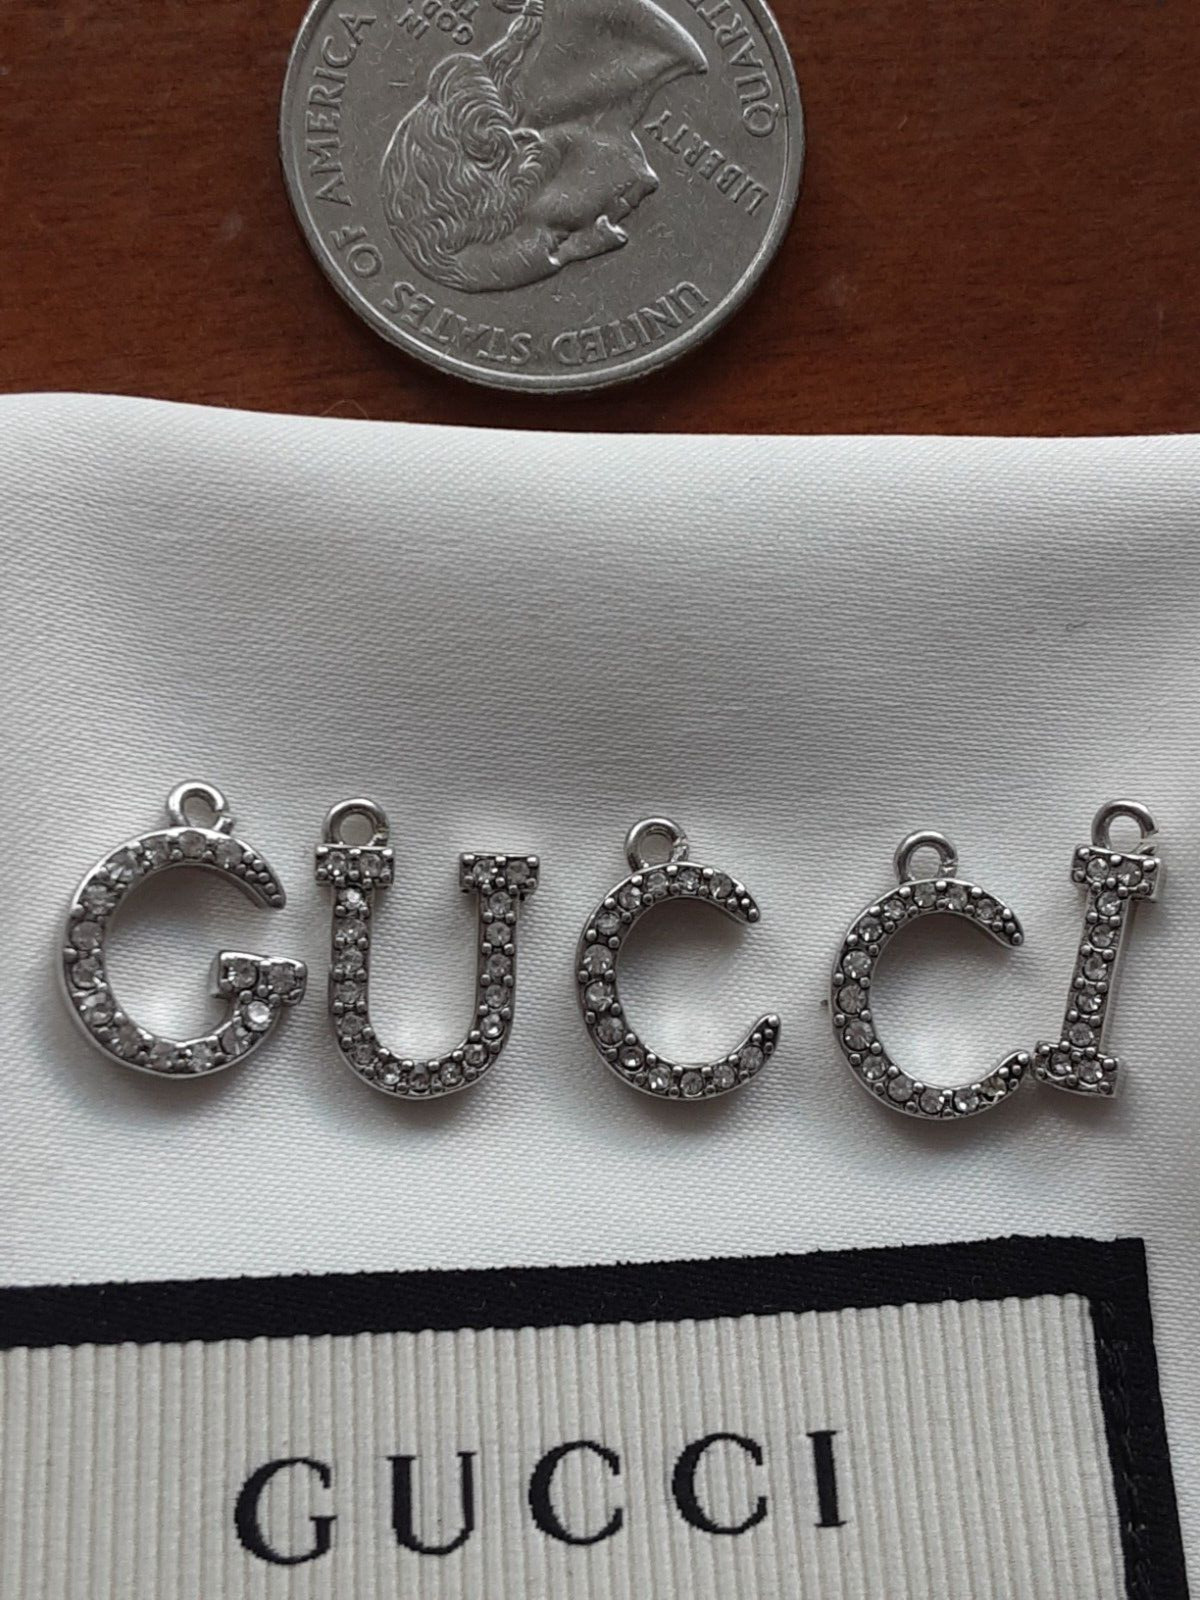 Gucci bronze metal   zipper pull  letters  buttons